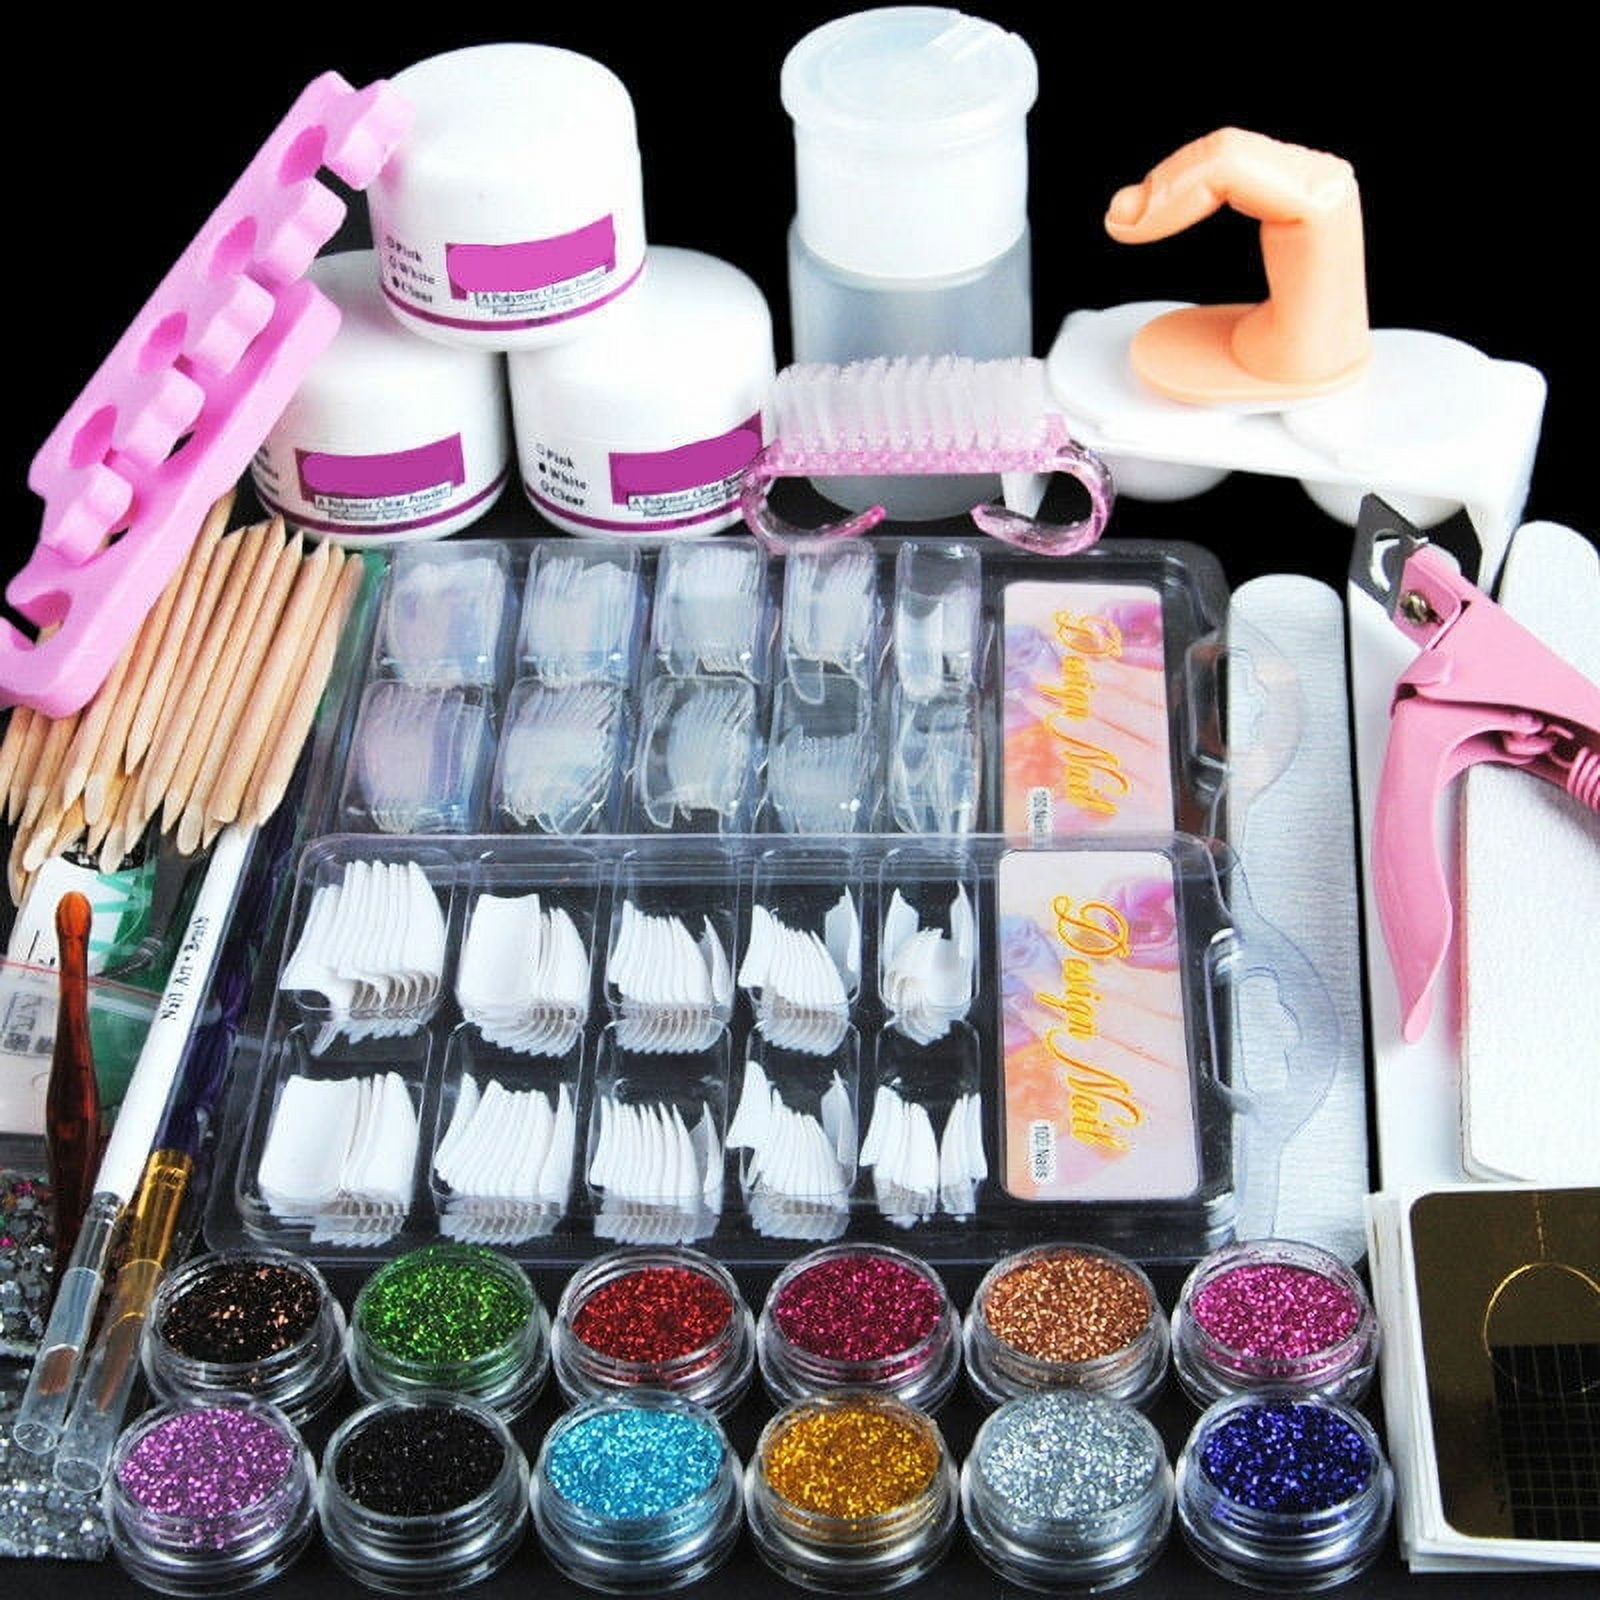 Nail Art Kit With 2 Plates, 15 Pc Nail Art Brush Set, 5 Pc Nail Dotting  Tool Set, 1 Silicon Stamper And Scrapper Complete Set. - 24x7 eMall